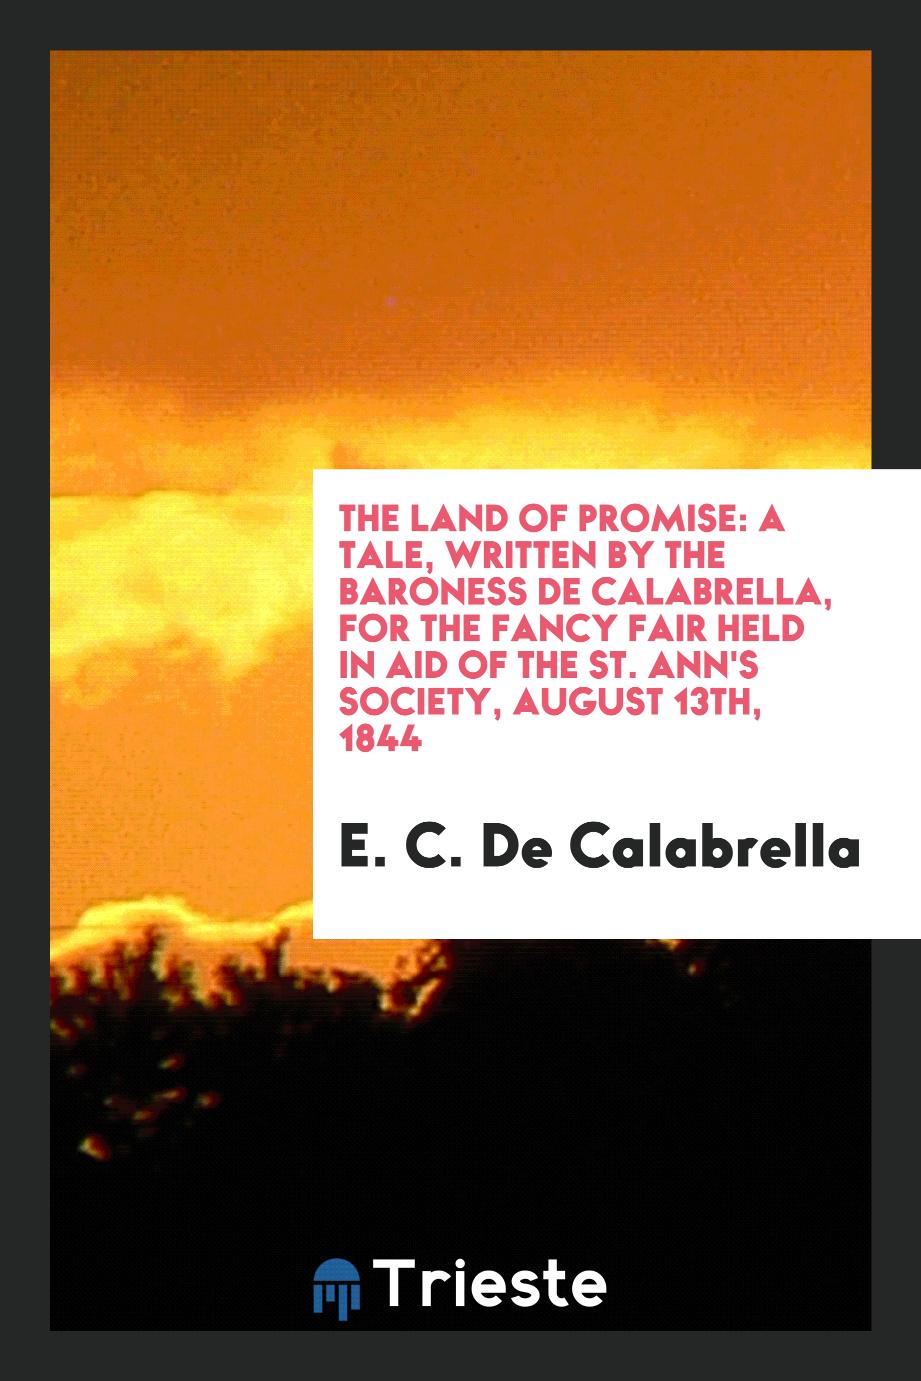 The Land of Promise: A Tale, Written by the Baroness De Calabrella, for the Fancy Fair Held in Aid of the St. Ann's Society, August 13th, 1844